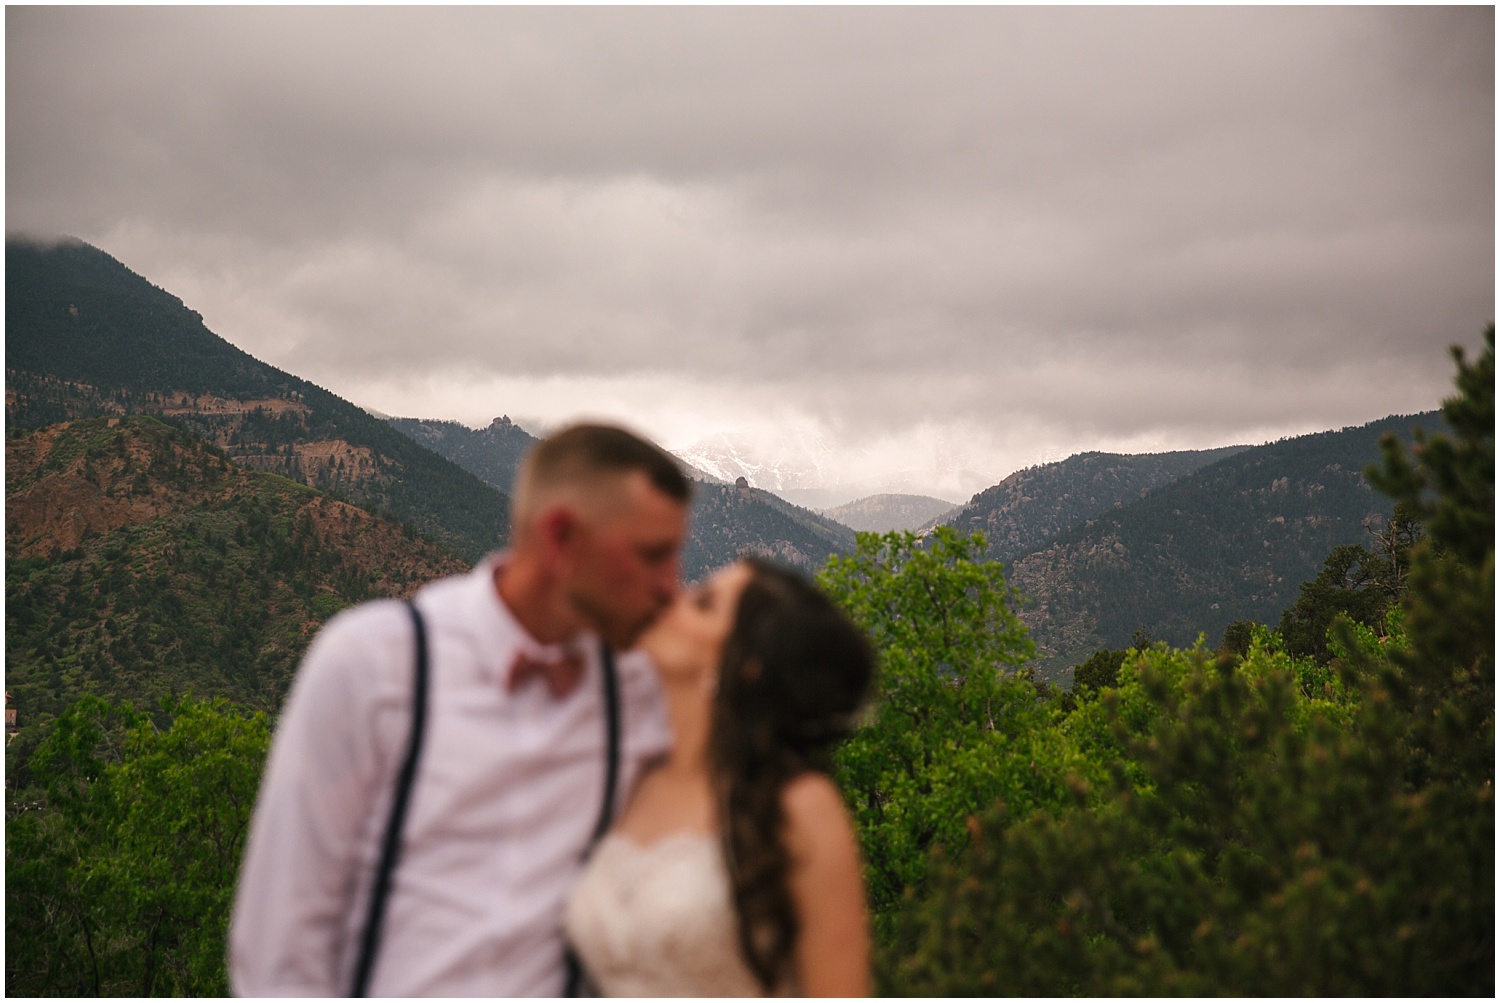 Thunderstorms over Pikes Peak behind kissing bride and groom